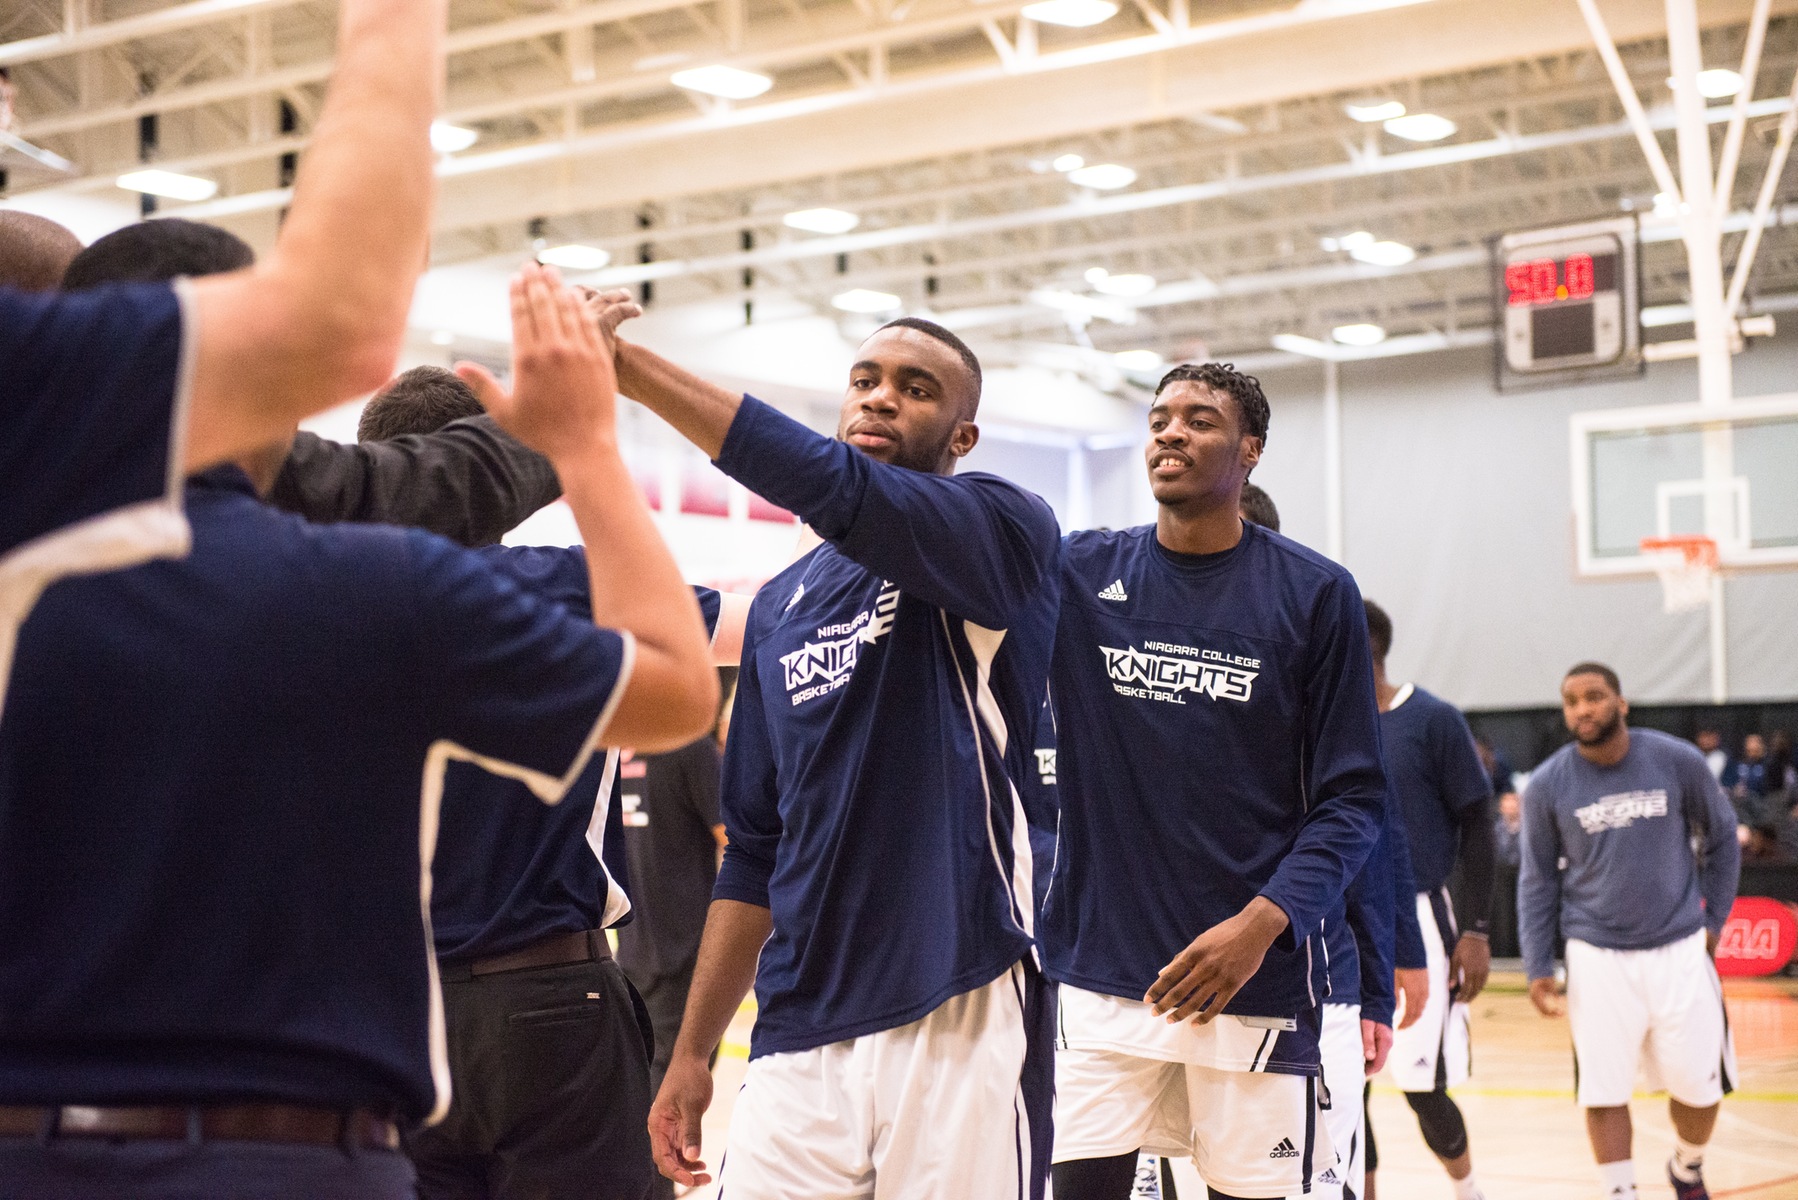 PREVIEW: Knights men's basketball set to face Huskies in OCAA Semi-Finals